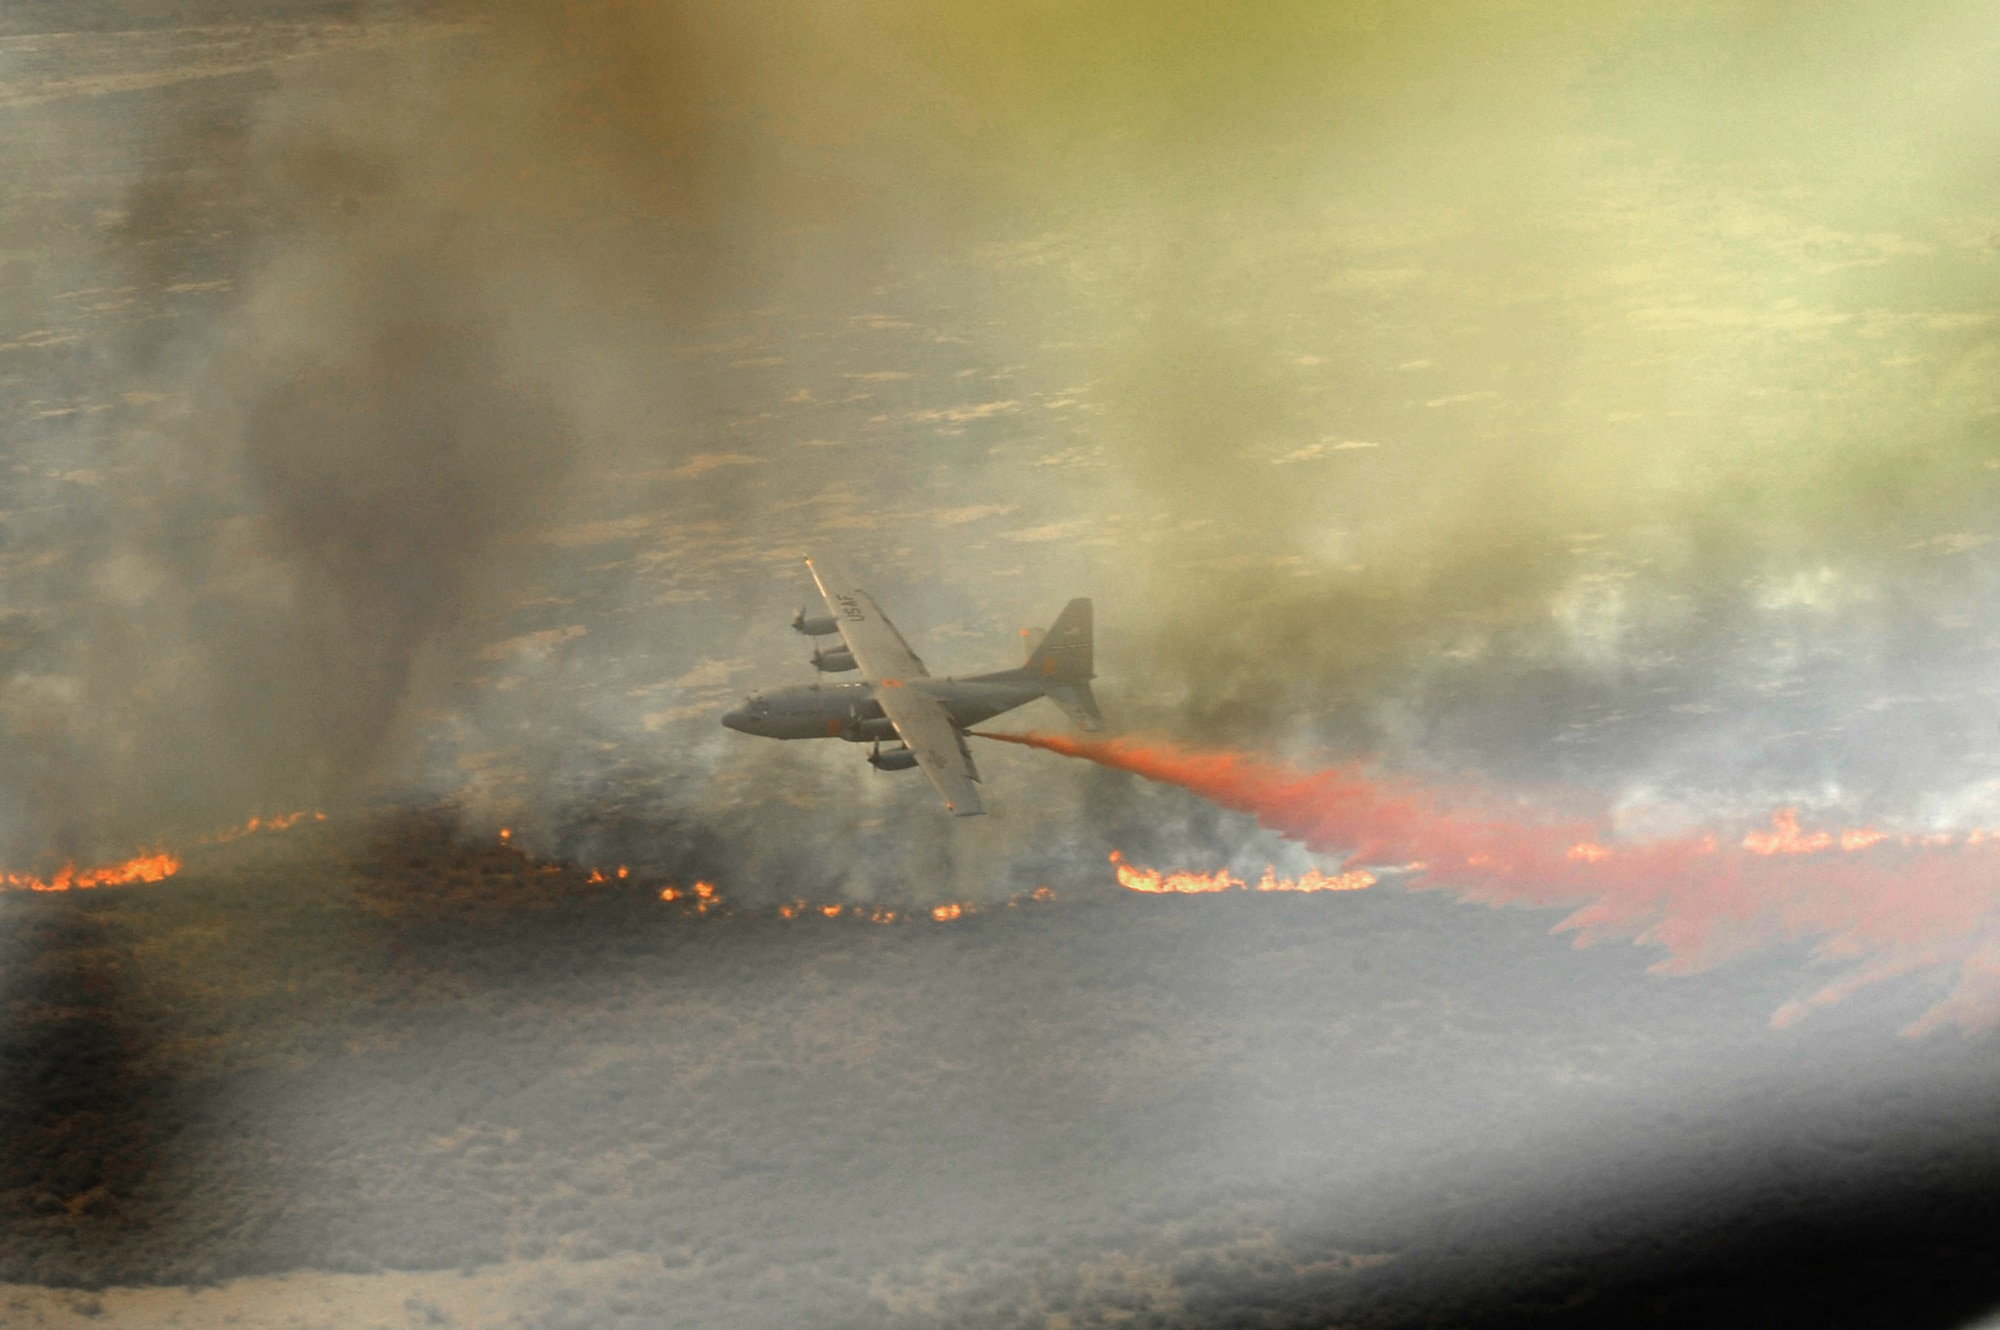 A C-130 Hercules, equipped with the Modular Airborne Firefighting System, drops fire retardant April 27, 2011, above West Texas. MAFFS is capable of dispensing 3,000 gallons of water or fire retardant in less than 5 seconds. (U.S. Air Force photo/Staff Sgt. Eric Harris)